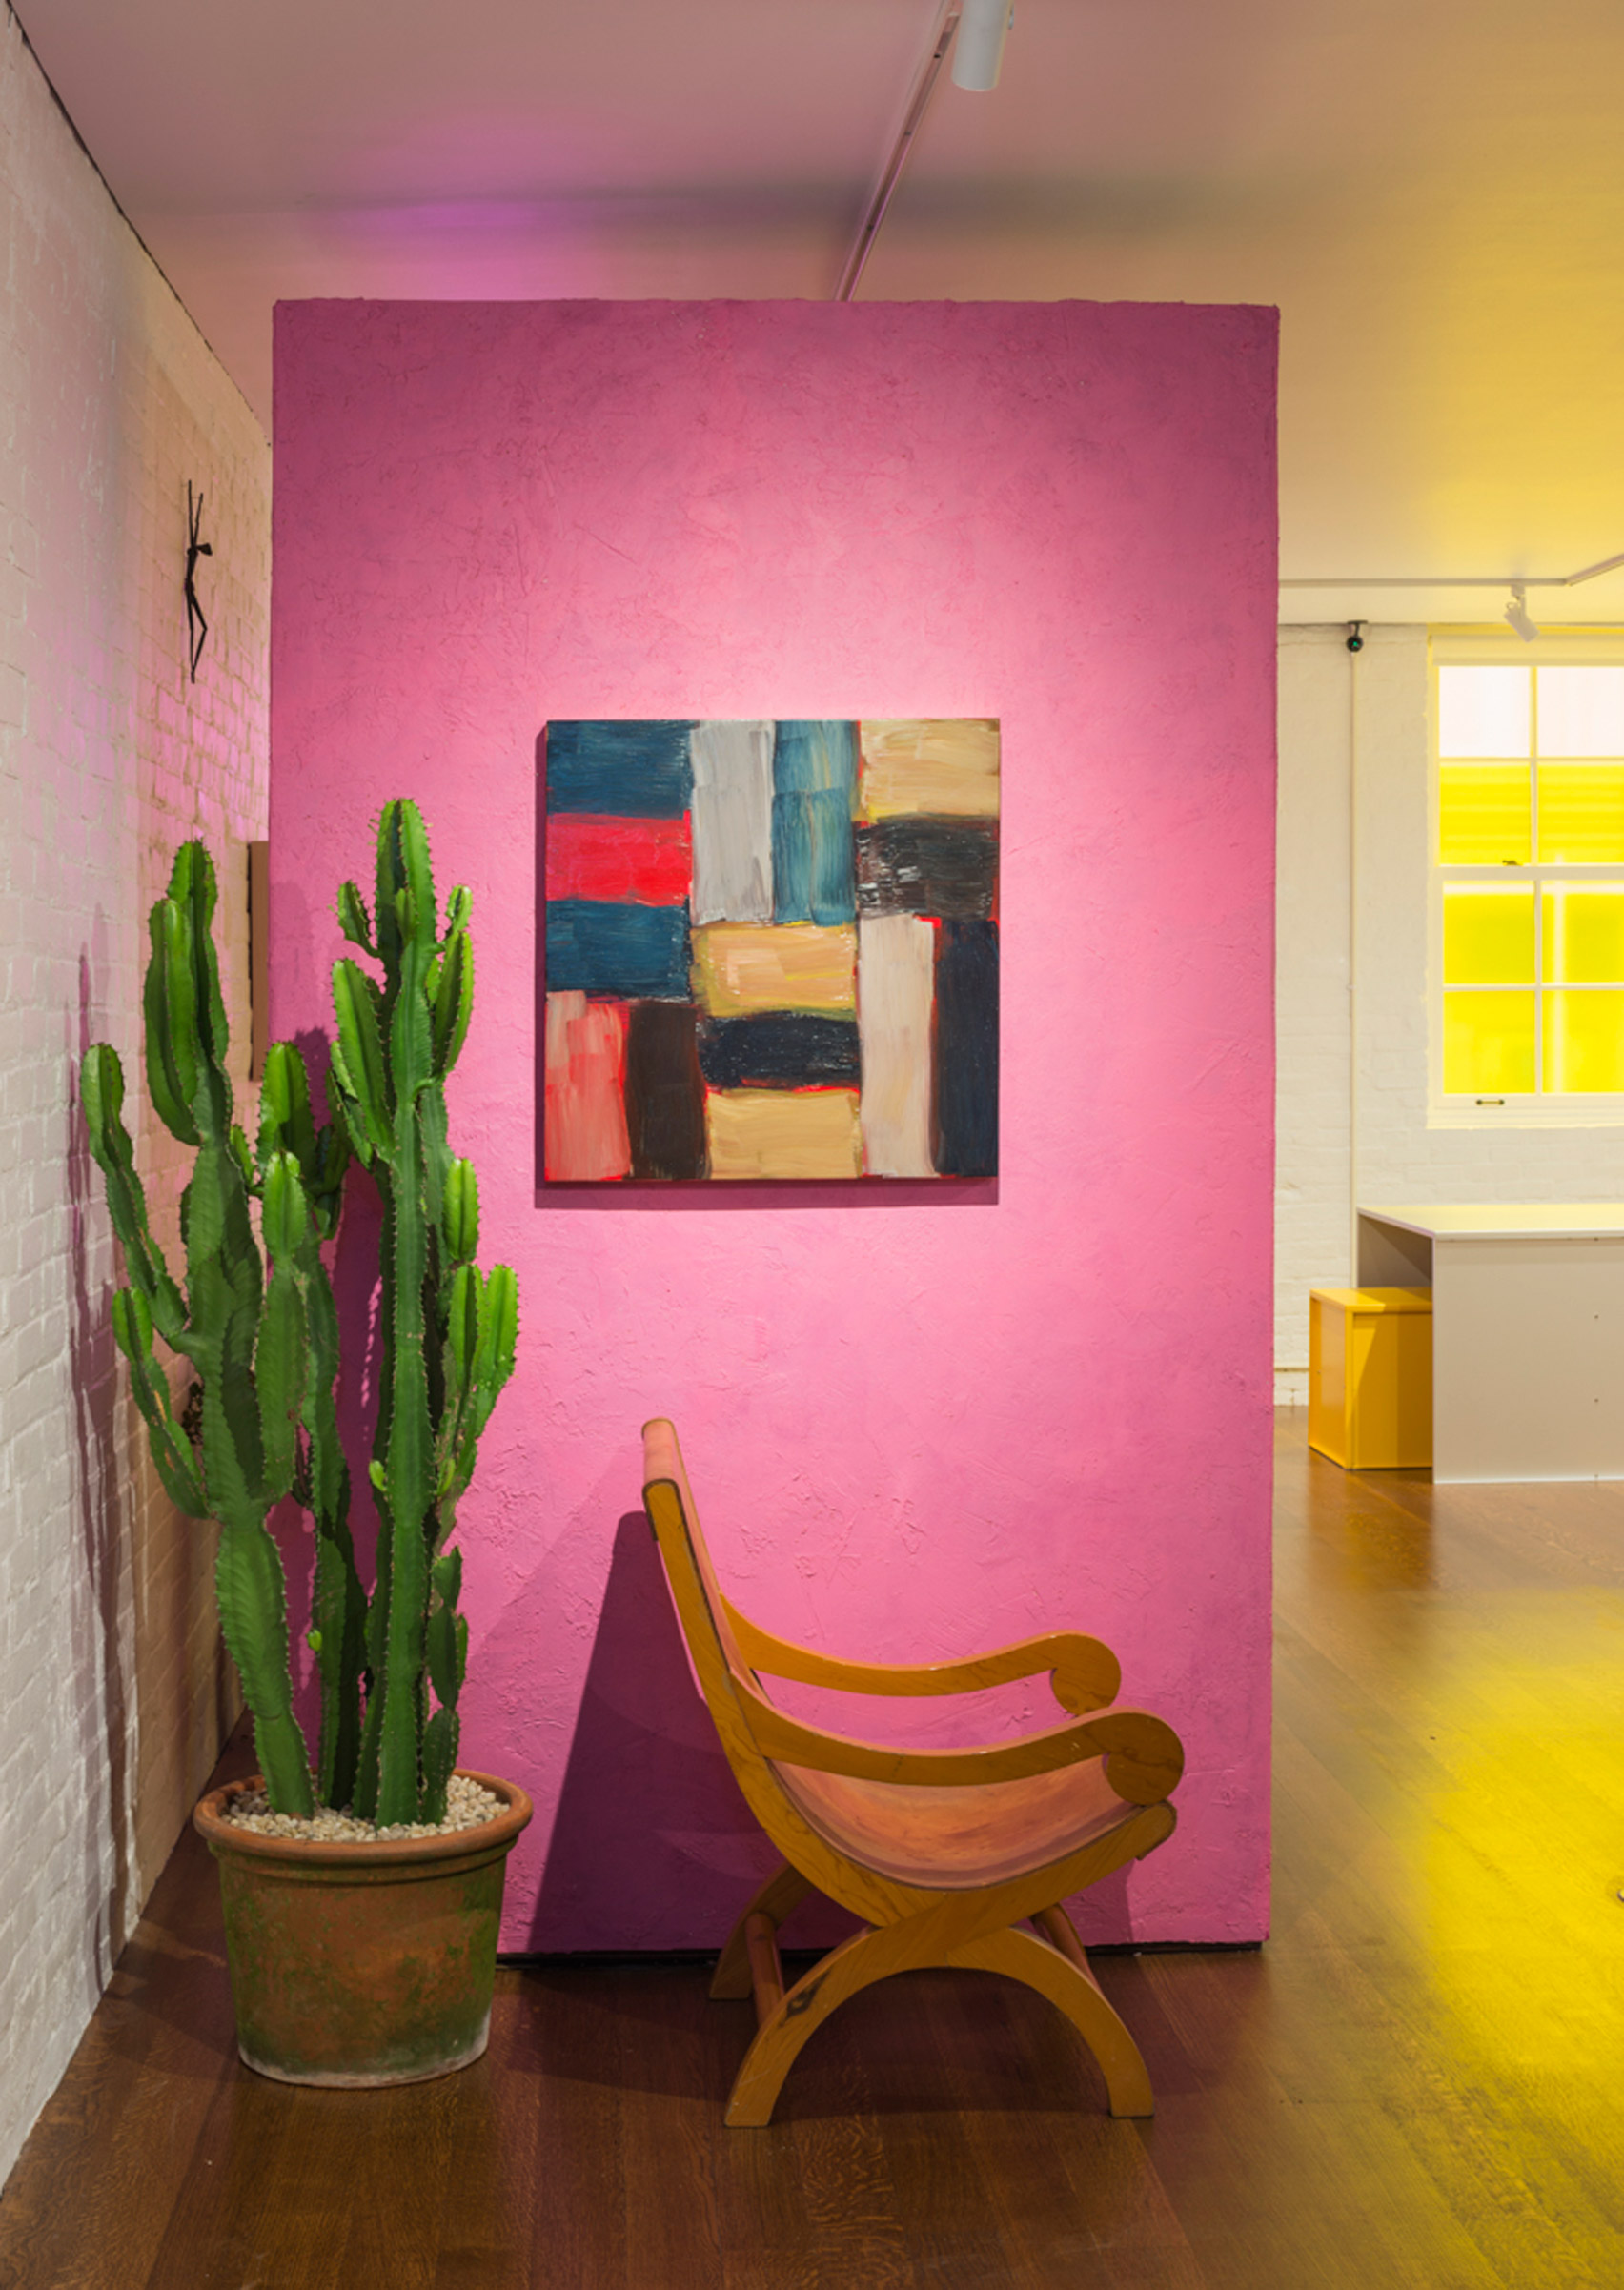 Architecture of Color: The Legacy of Luis Barragán exhibition at Timothy Taylor, New York